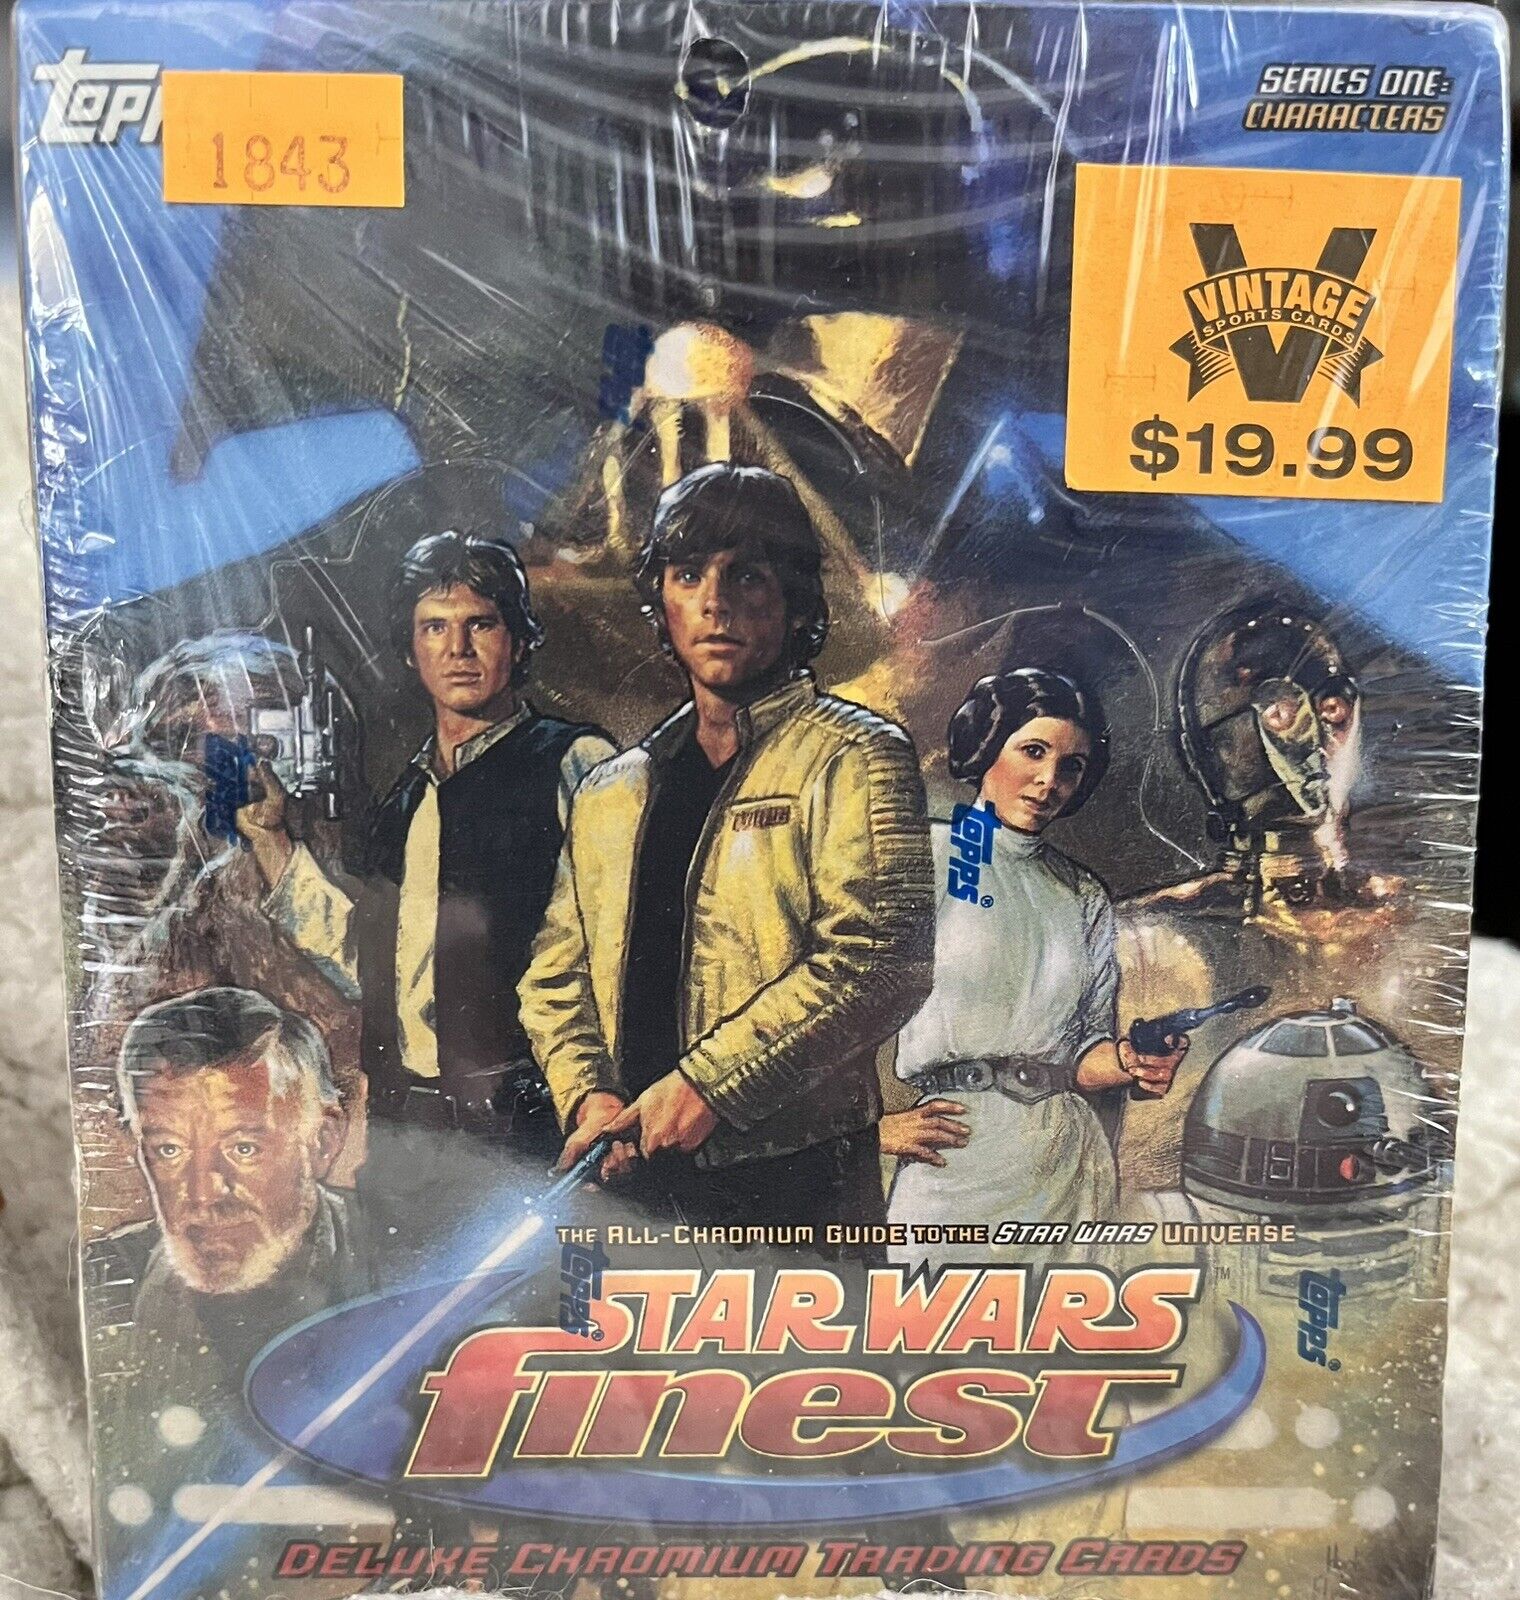 1996 Topps Star Wars Finest Series 1 Characters Deluxe Chromium Cards Sealed Box